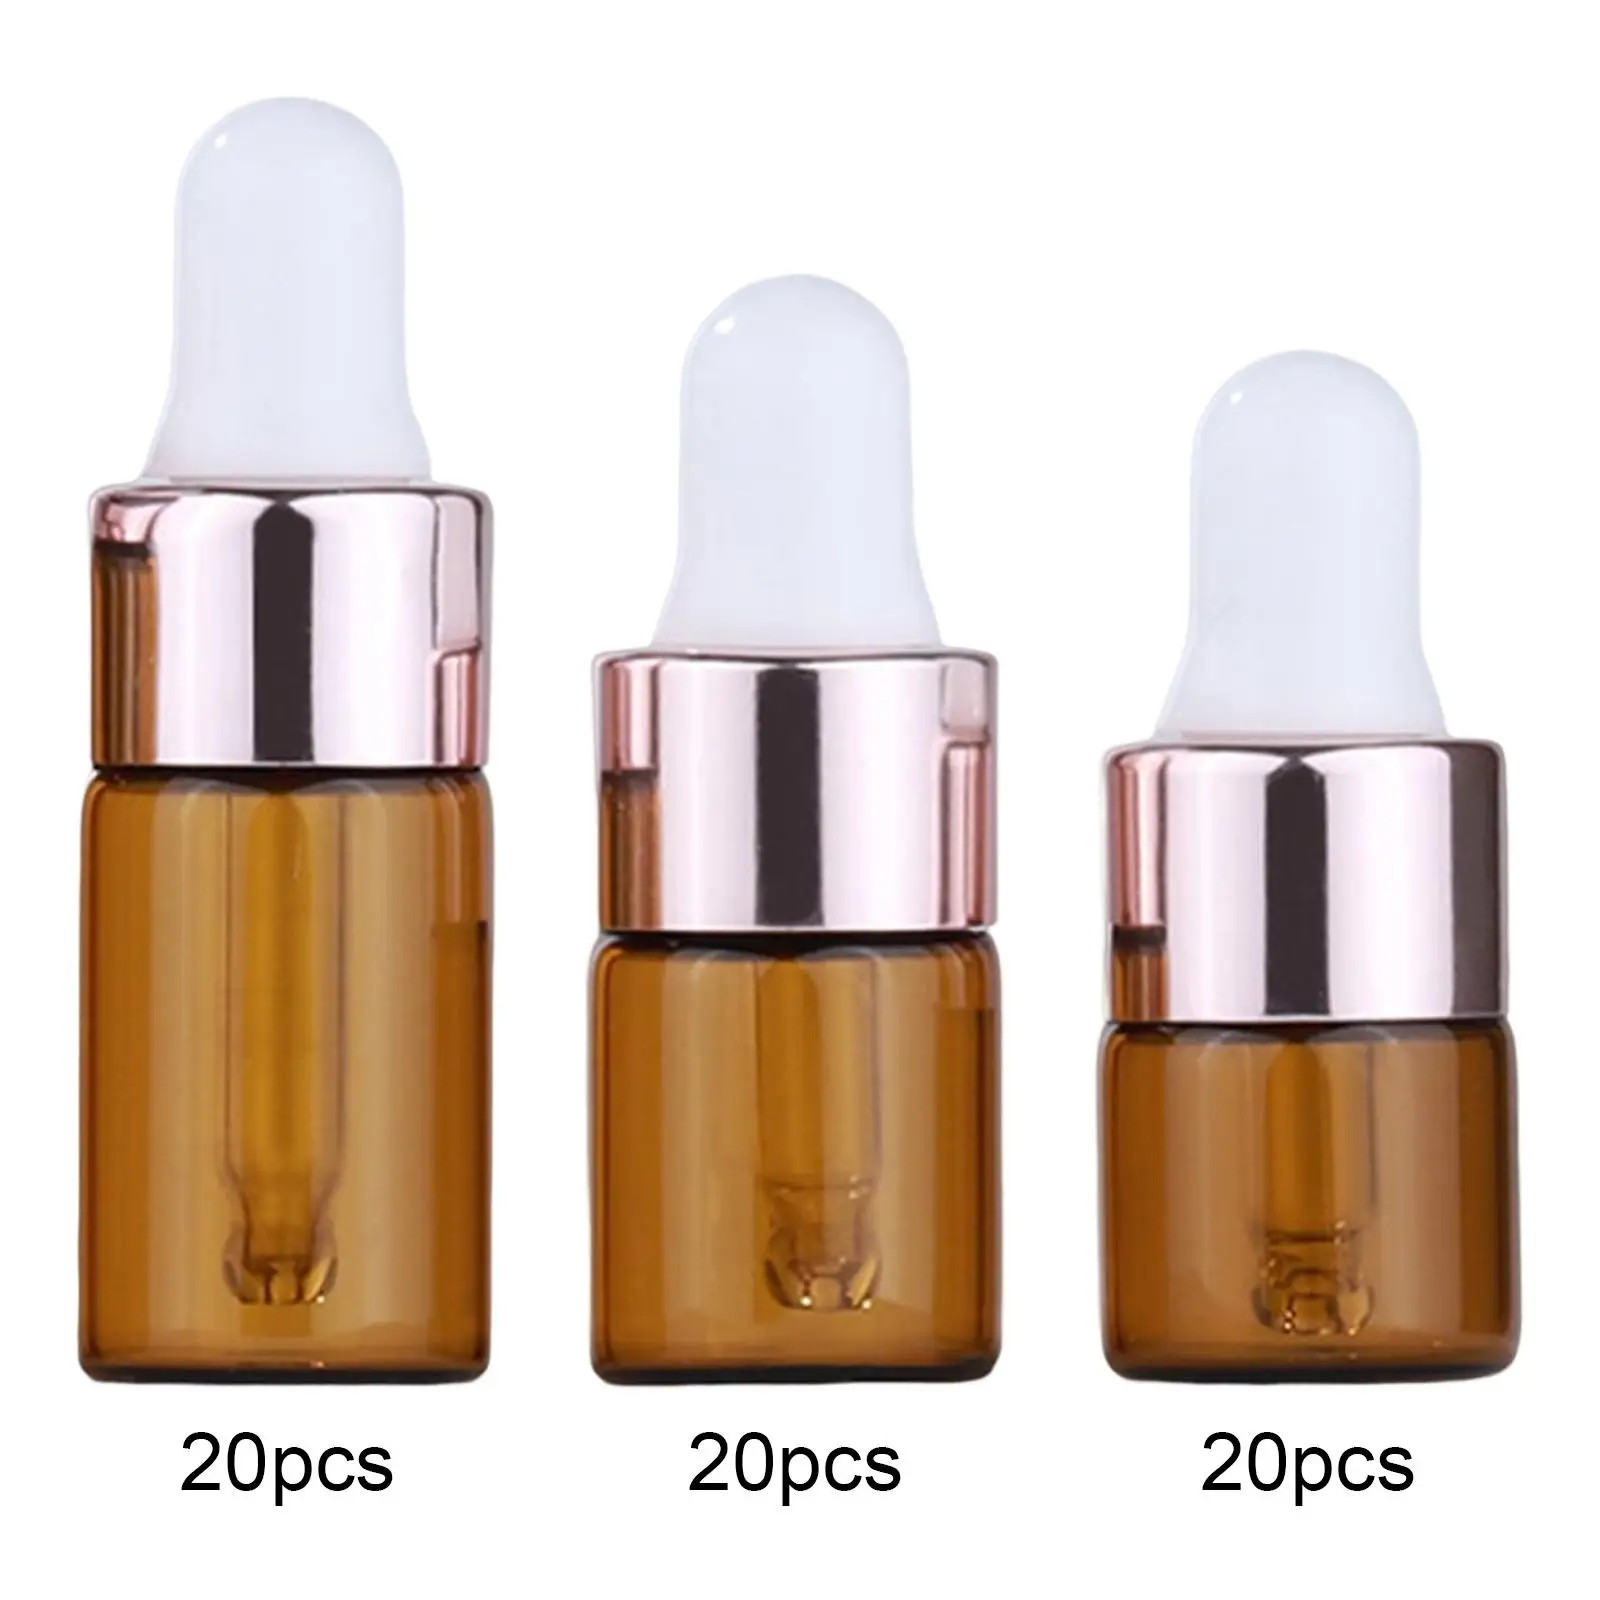 20 Pieces Mini Empty Glass Dropper Bottles Refillable Travel Bottles with Eye Droppers for Essential Oil Cosmetic Hair Oil